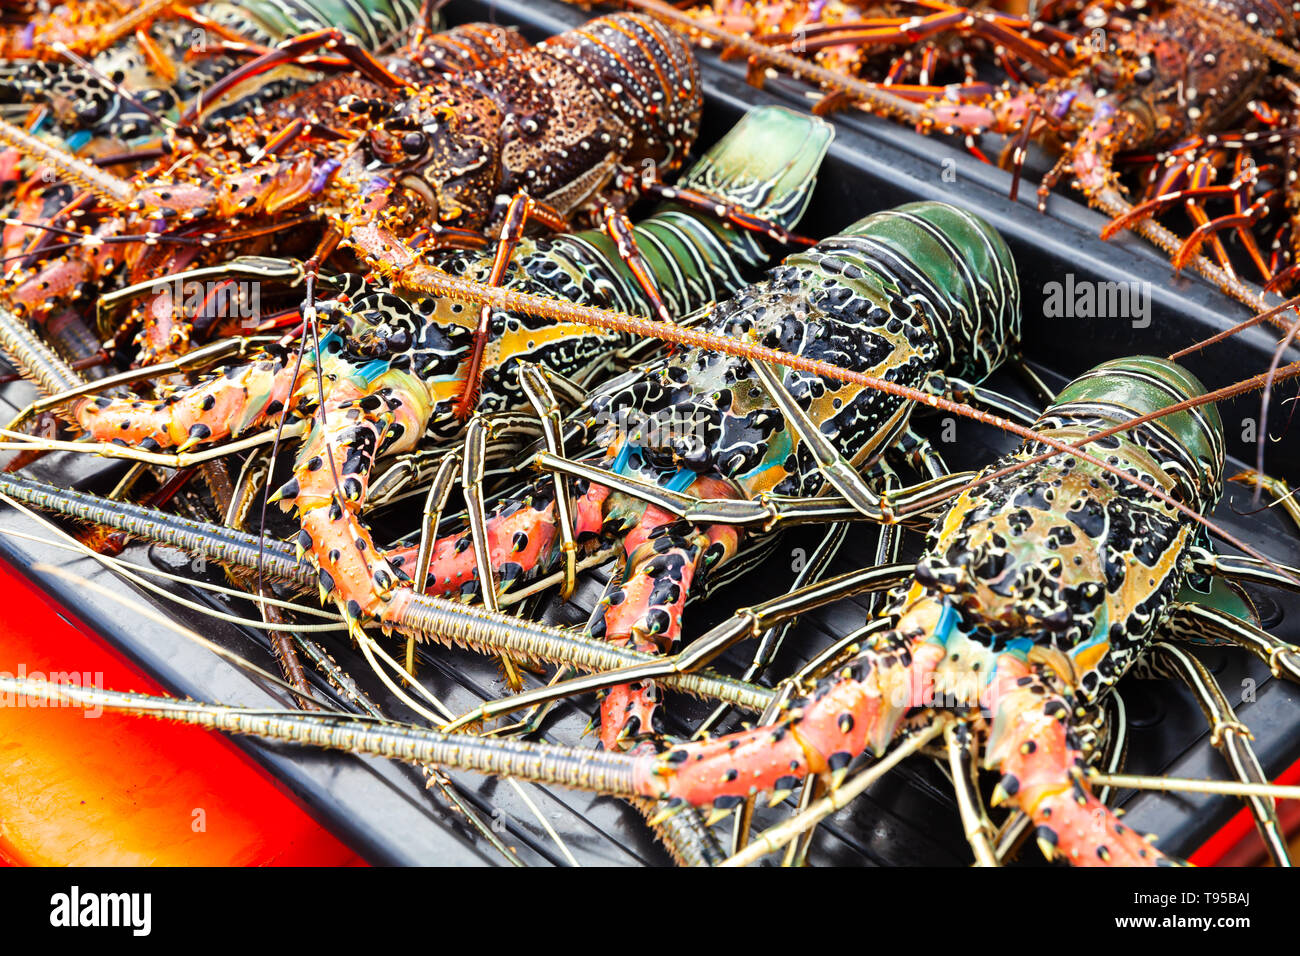 Catch of tropical rock lobsters lay on counter of the main Fish market of Kota Kinabalu, Malaysia Stock Photo